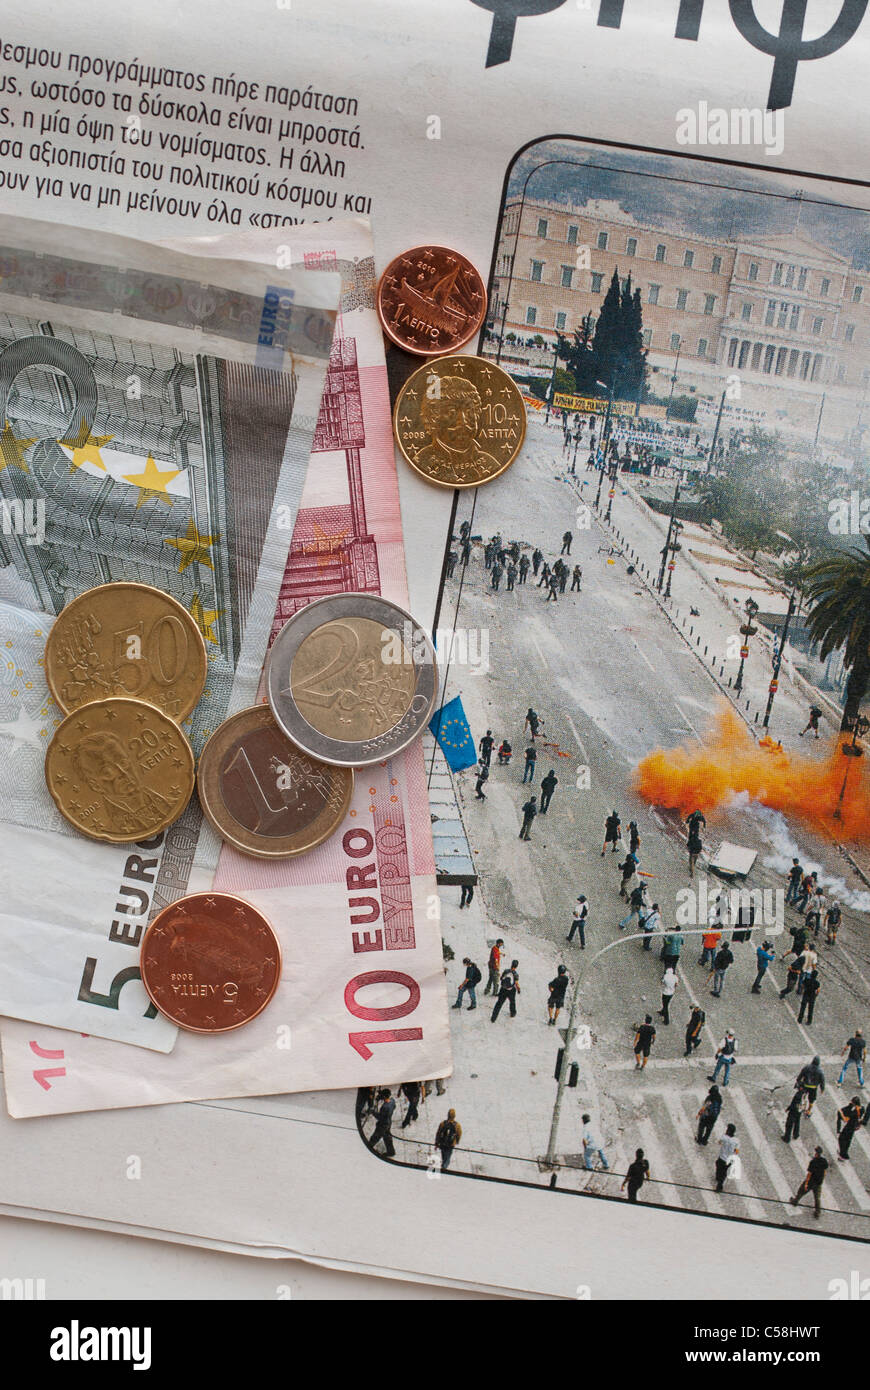 greece,protests,financial,bailout,crisis, Stock Photo